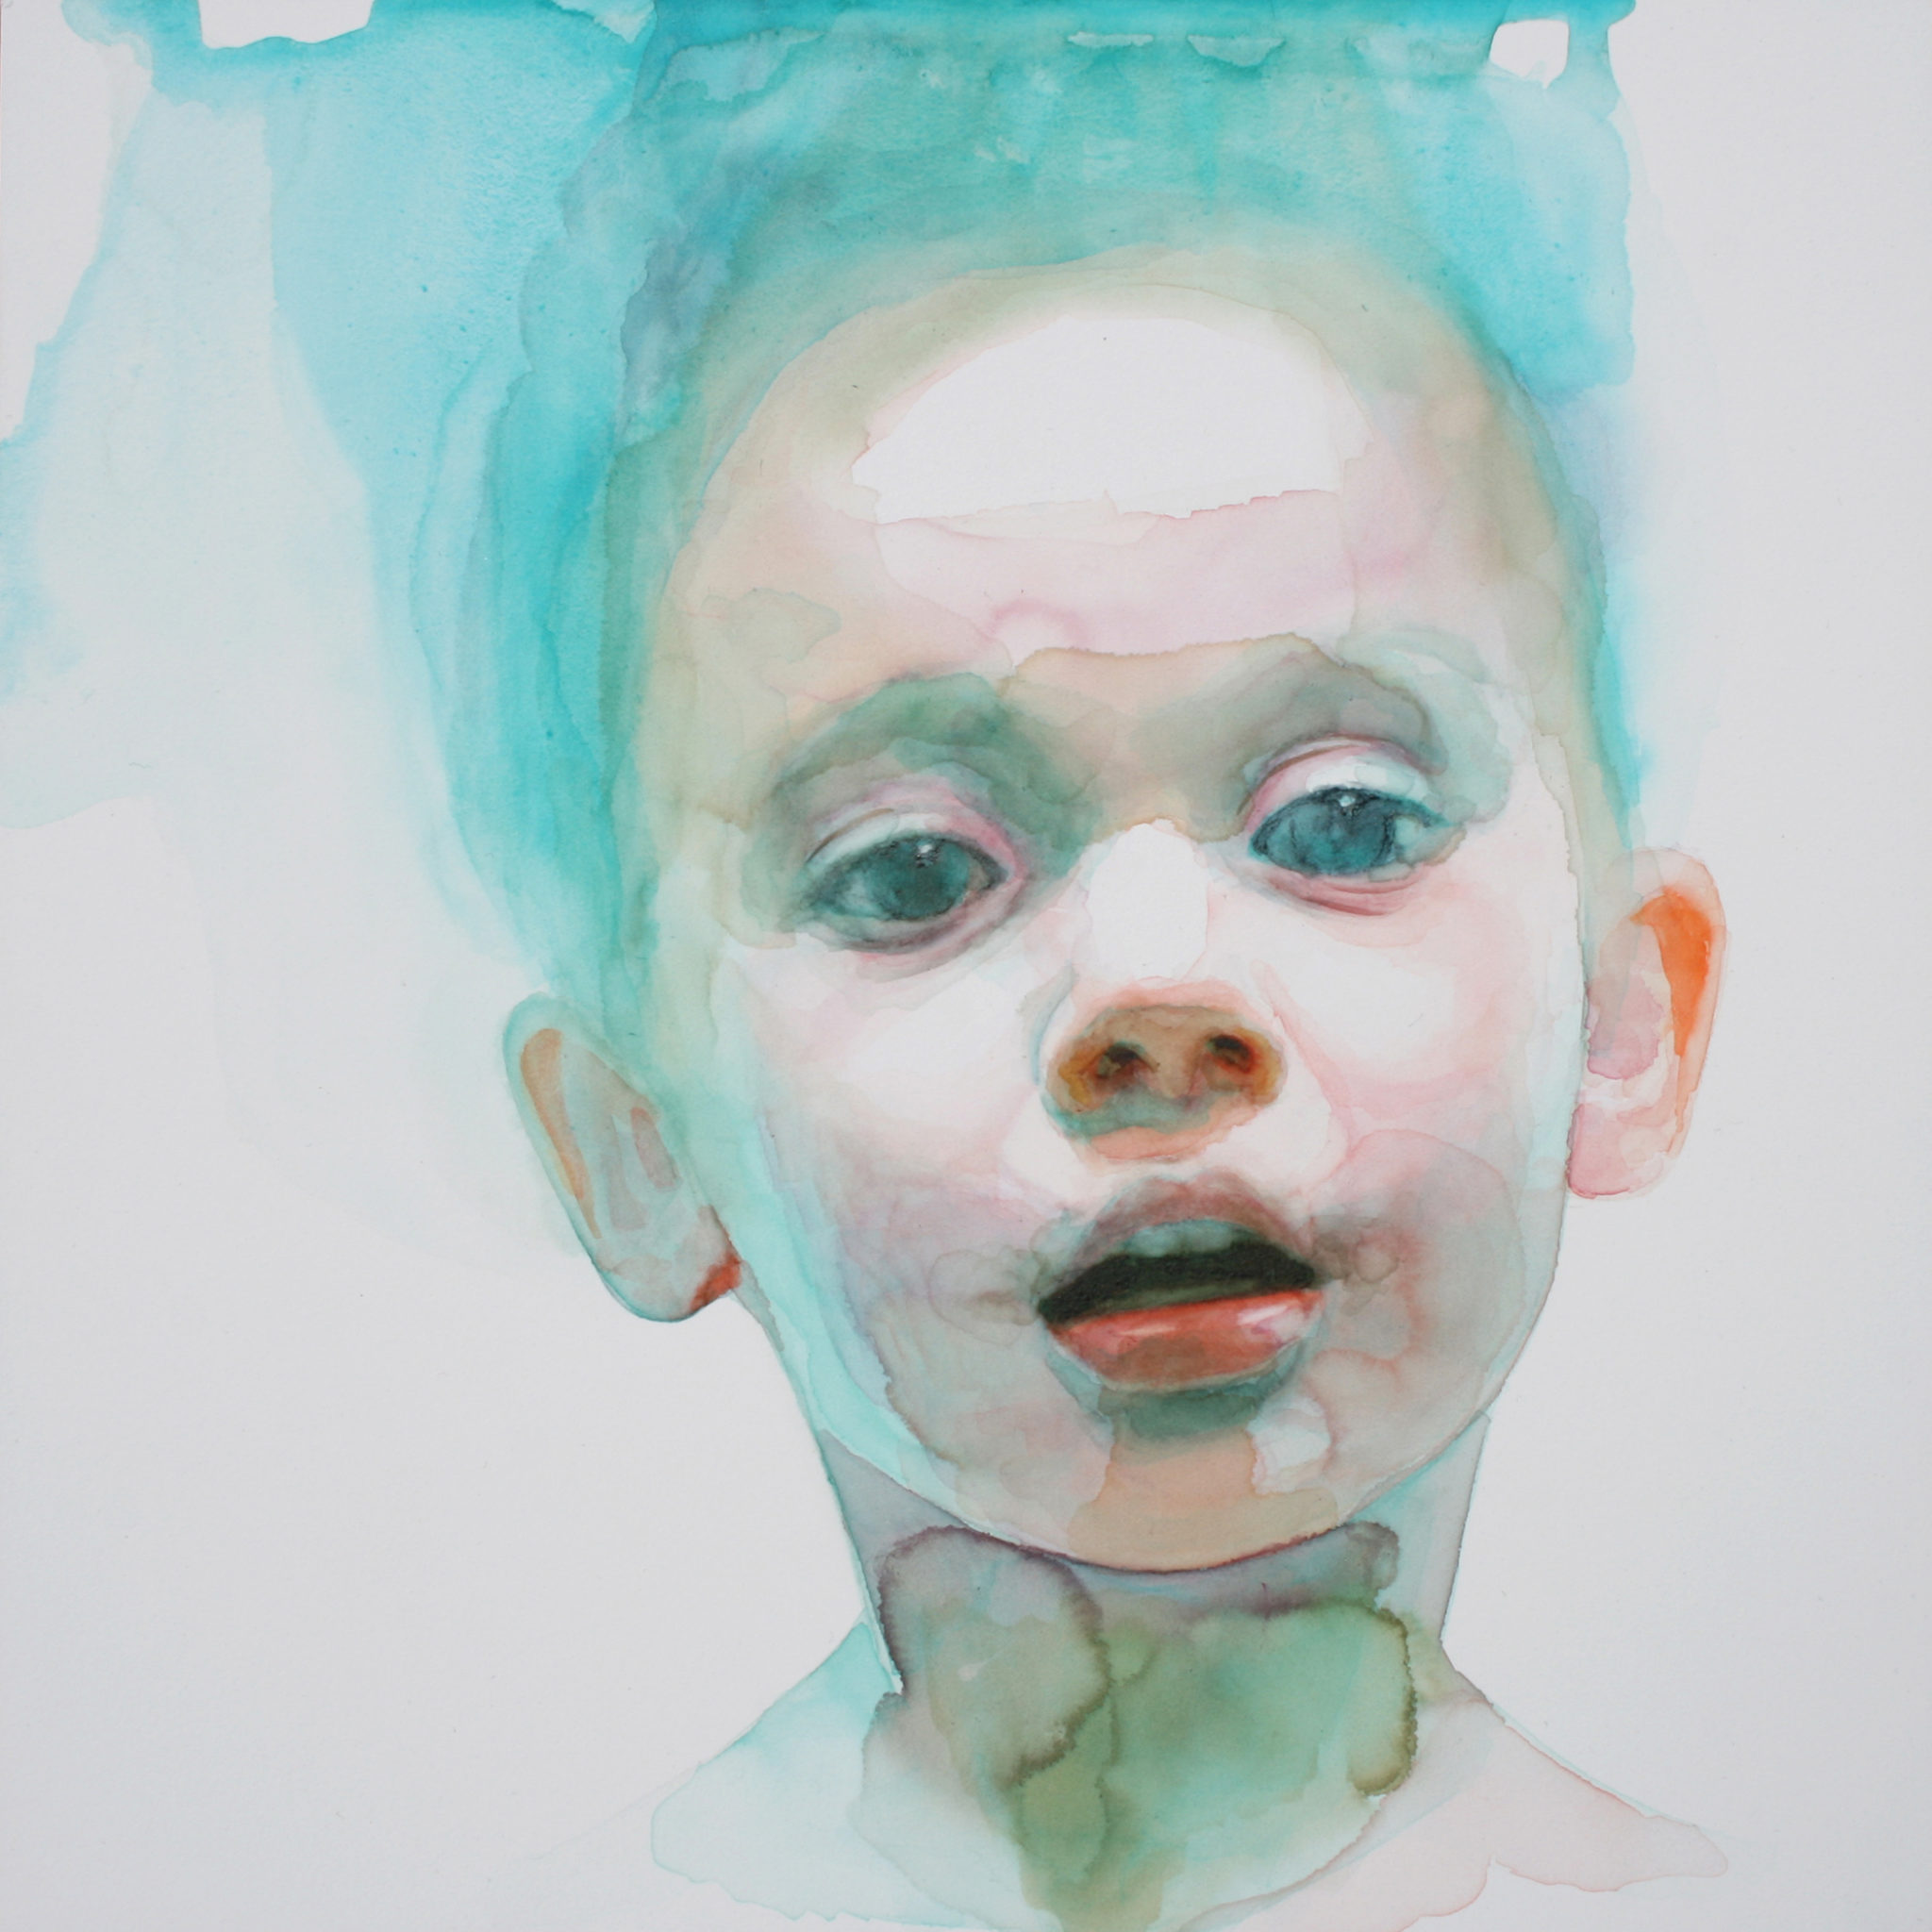 How a “Baby Painting” Inspired Ali Cavanaugh - Realism Today